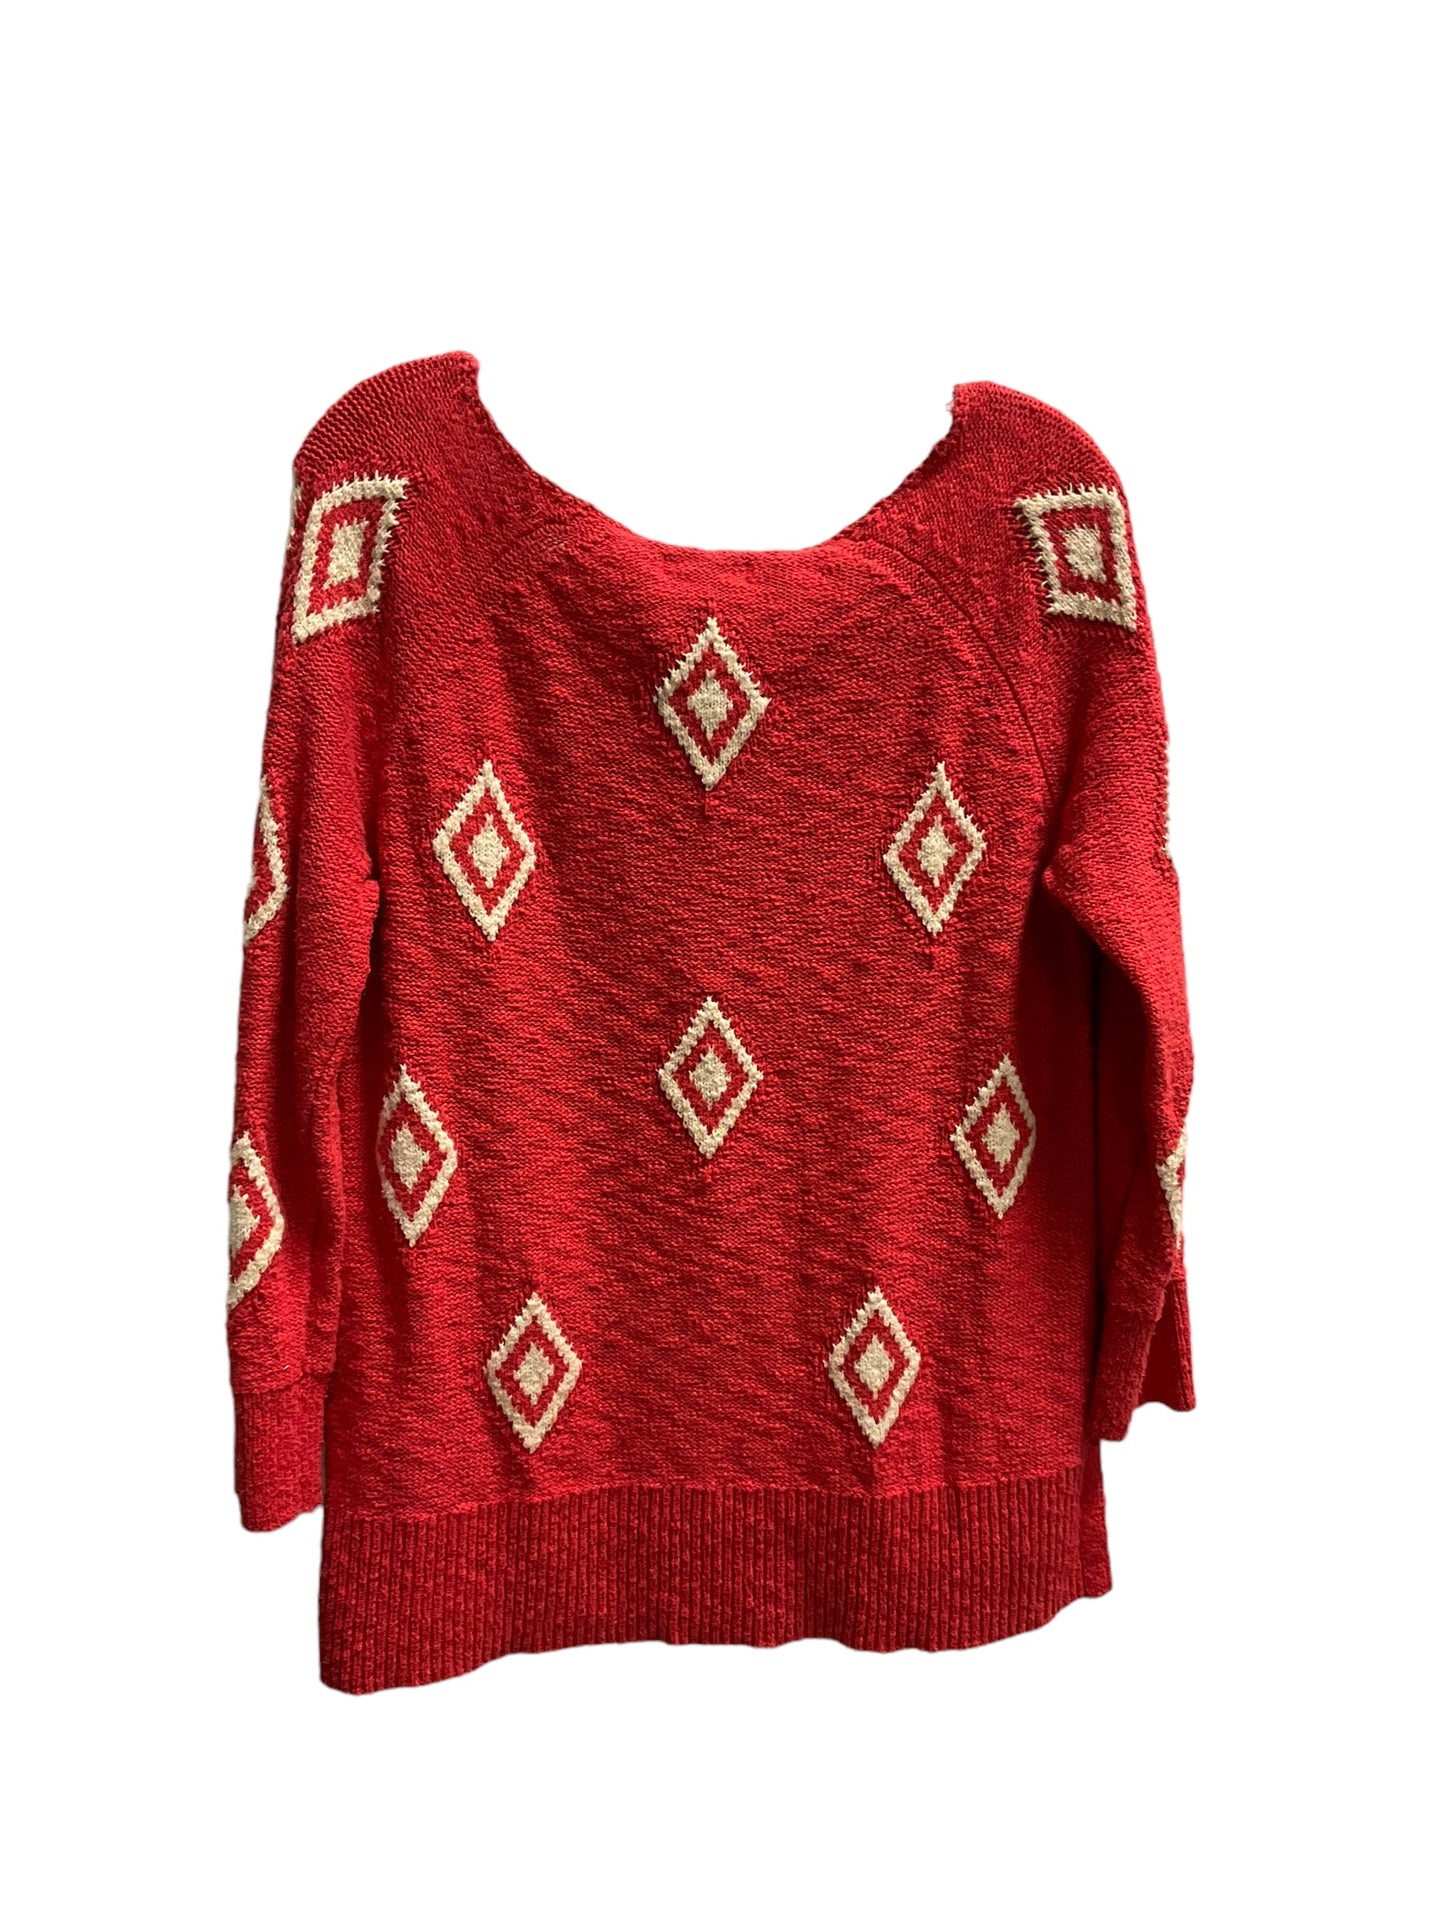 Sweater By Lucky Brand  Size: L